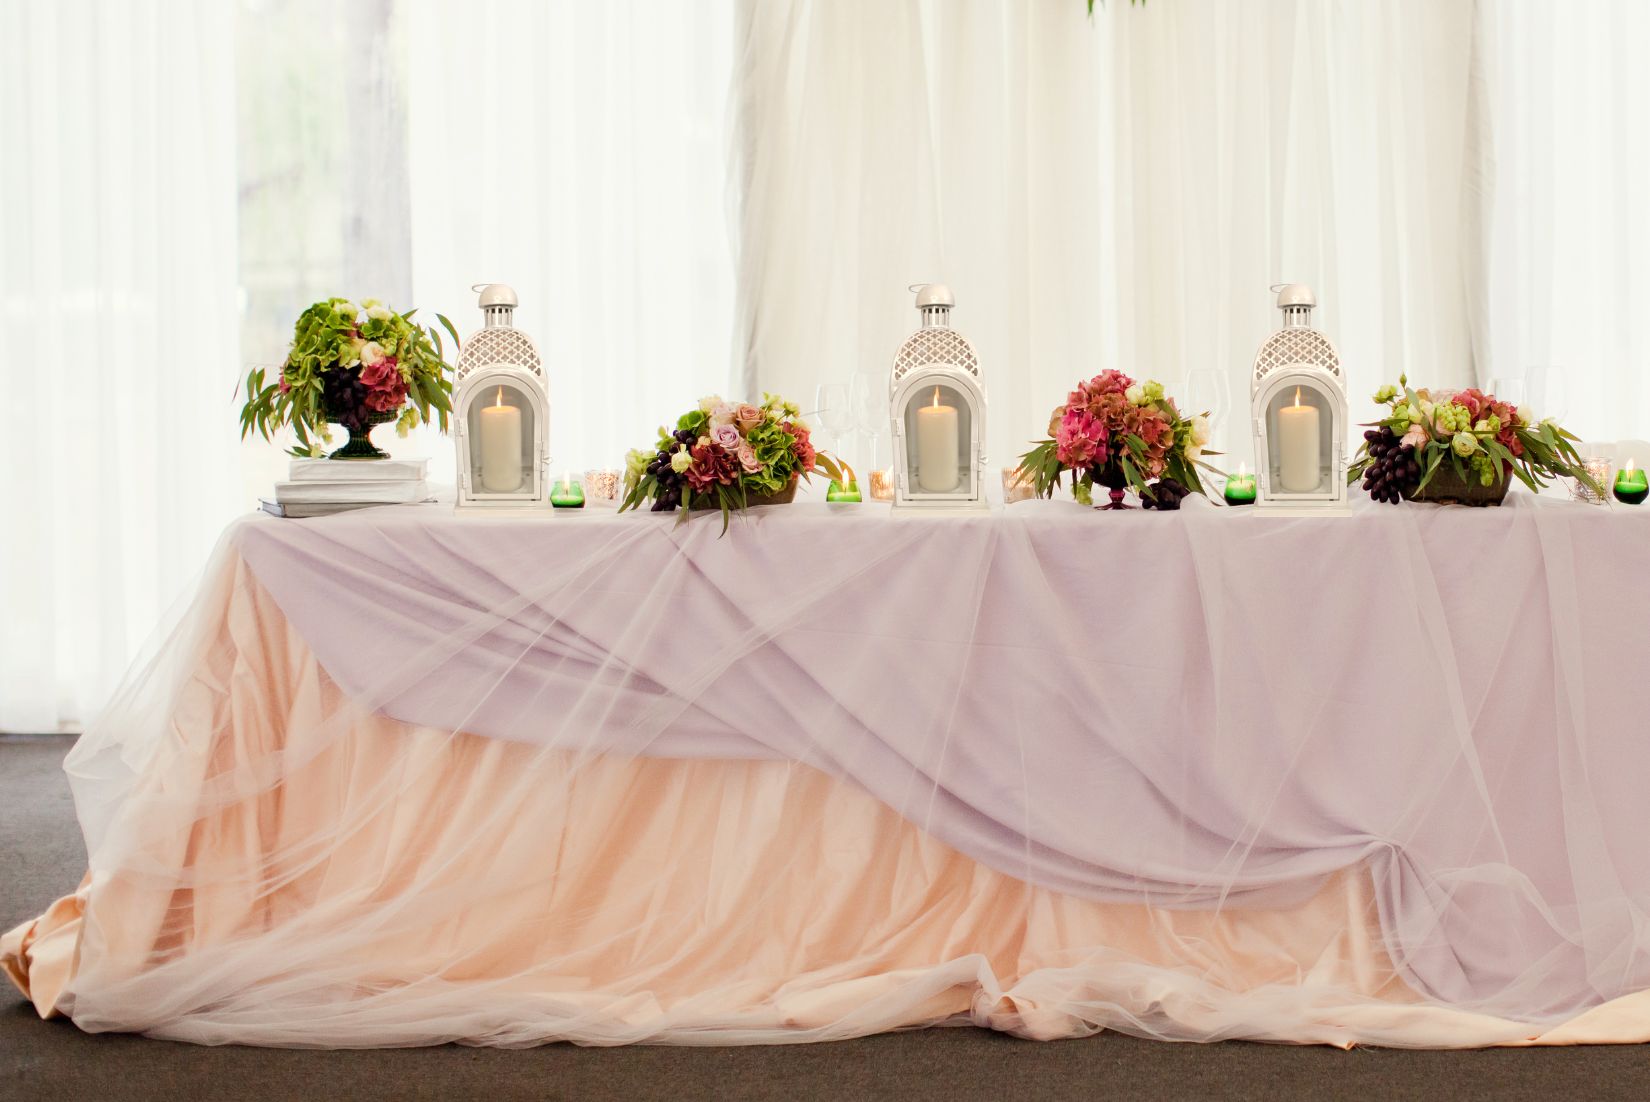 Dais table with lantern and floral decor.